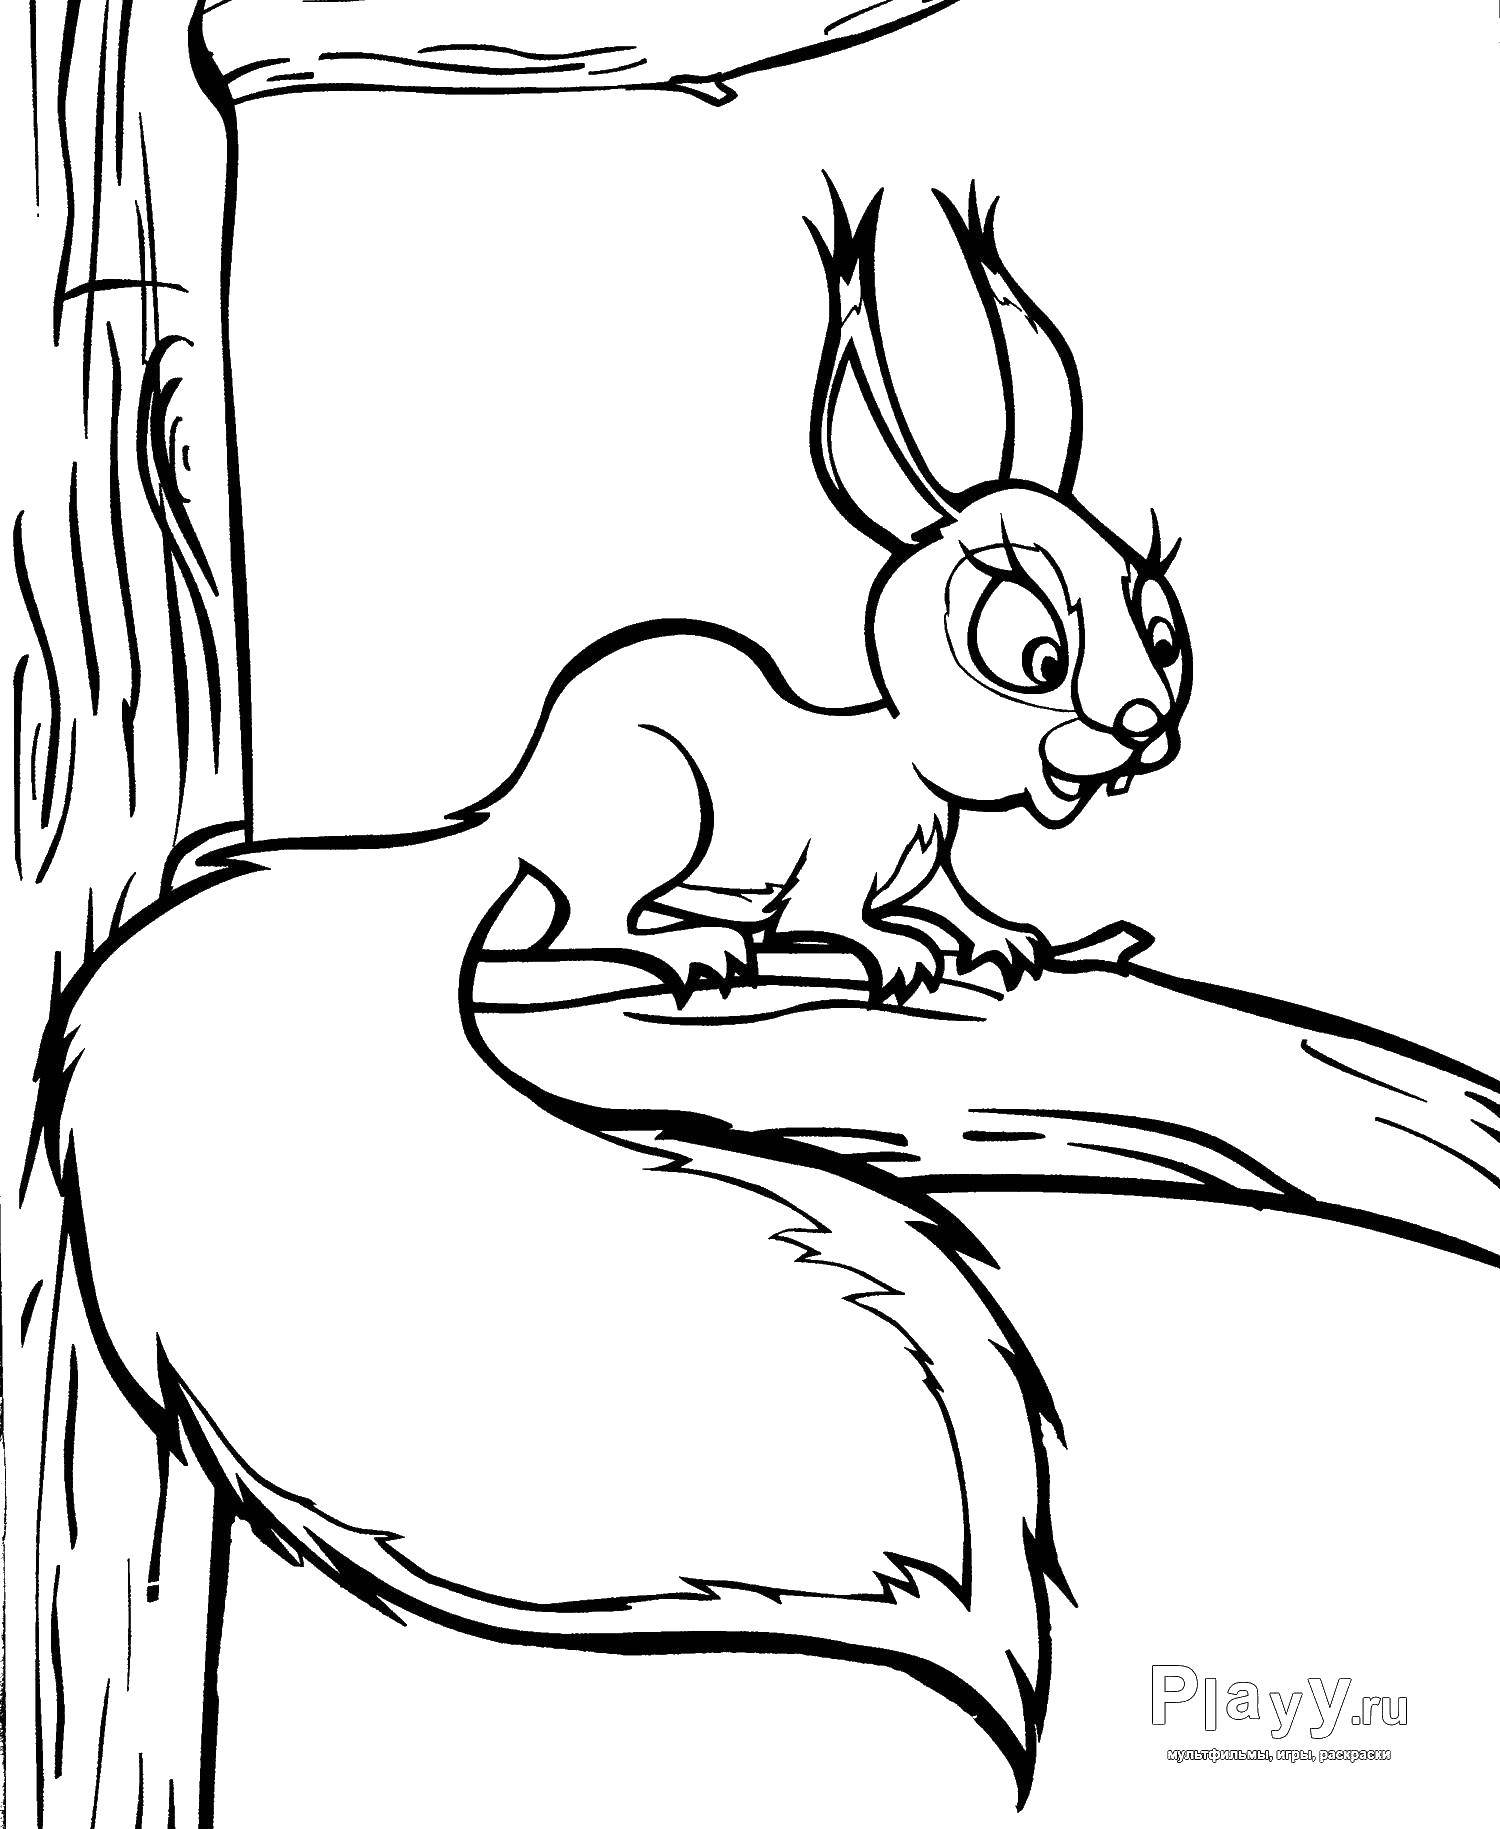 Coloring Squirrel with fluffy tail. Category cartoons. Tags:  cartoon squirrel.